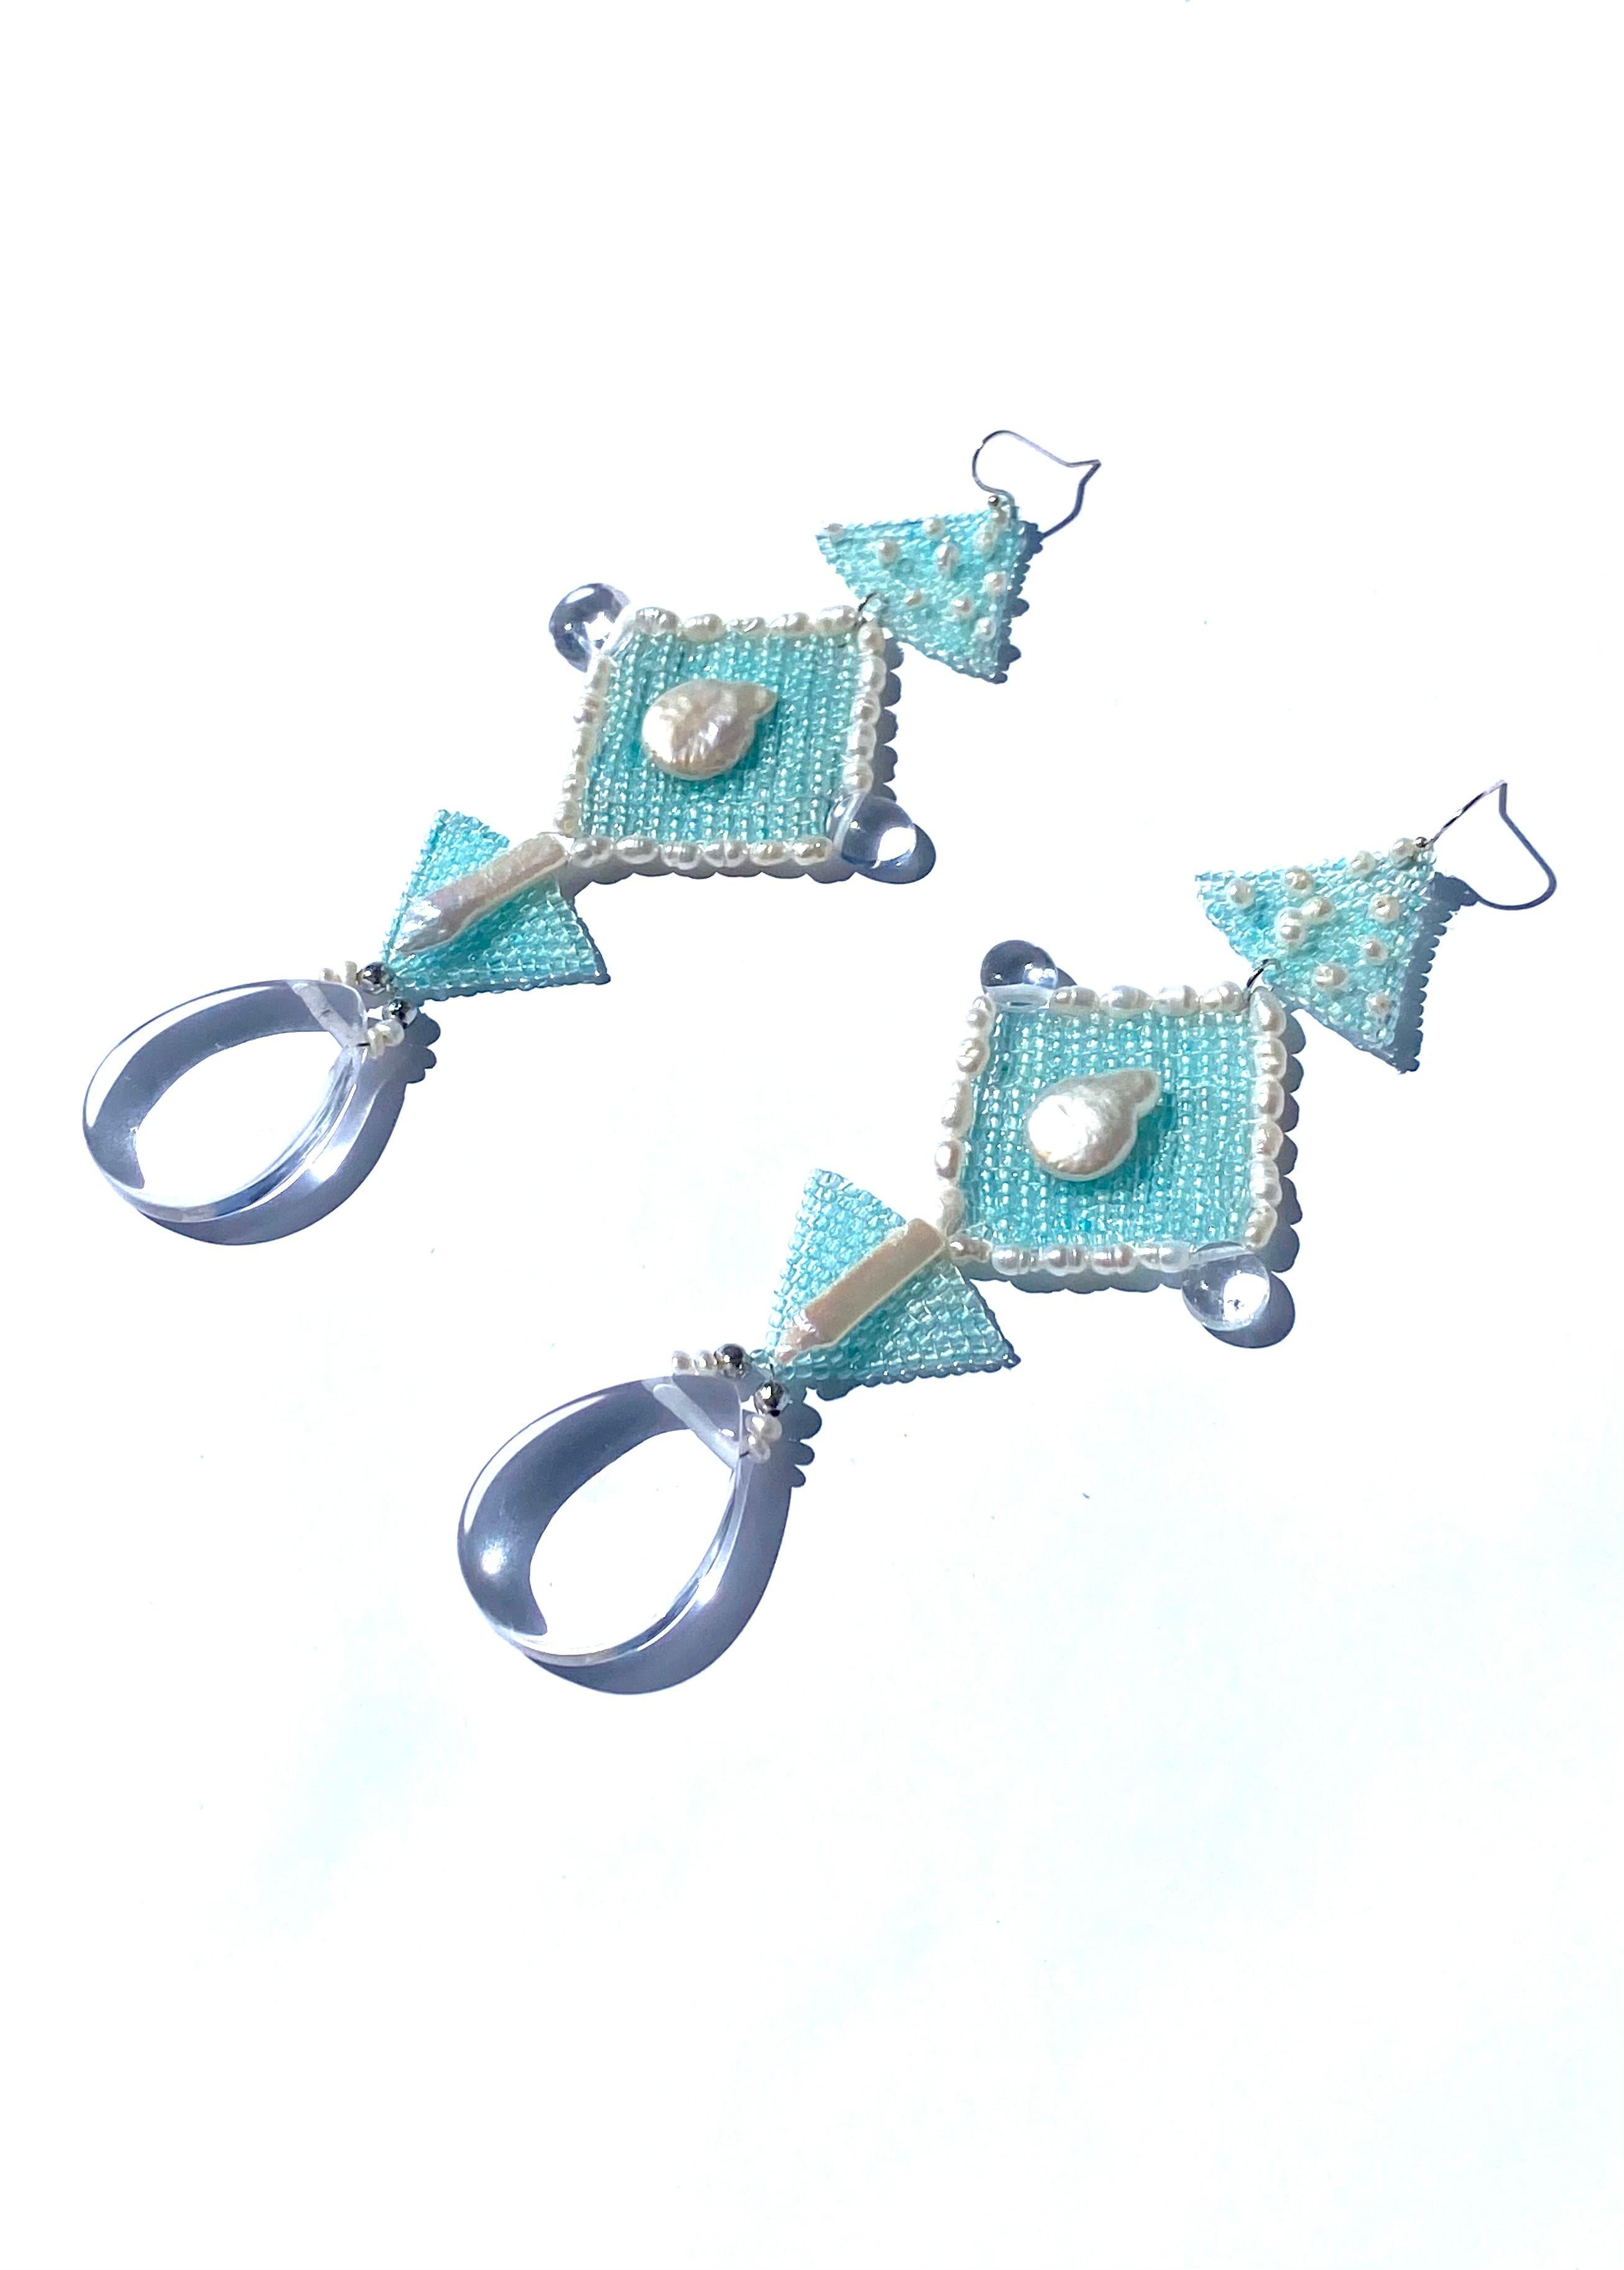 Handwoven glow in the dark sea foam blue glass Japanese seed beads embroidered with freshwater pearls and quartz. At the tip of the earring a large pear shaped quartz crystal stone dangles, symbolizing the sanctity and strength of water. According